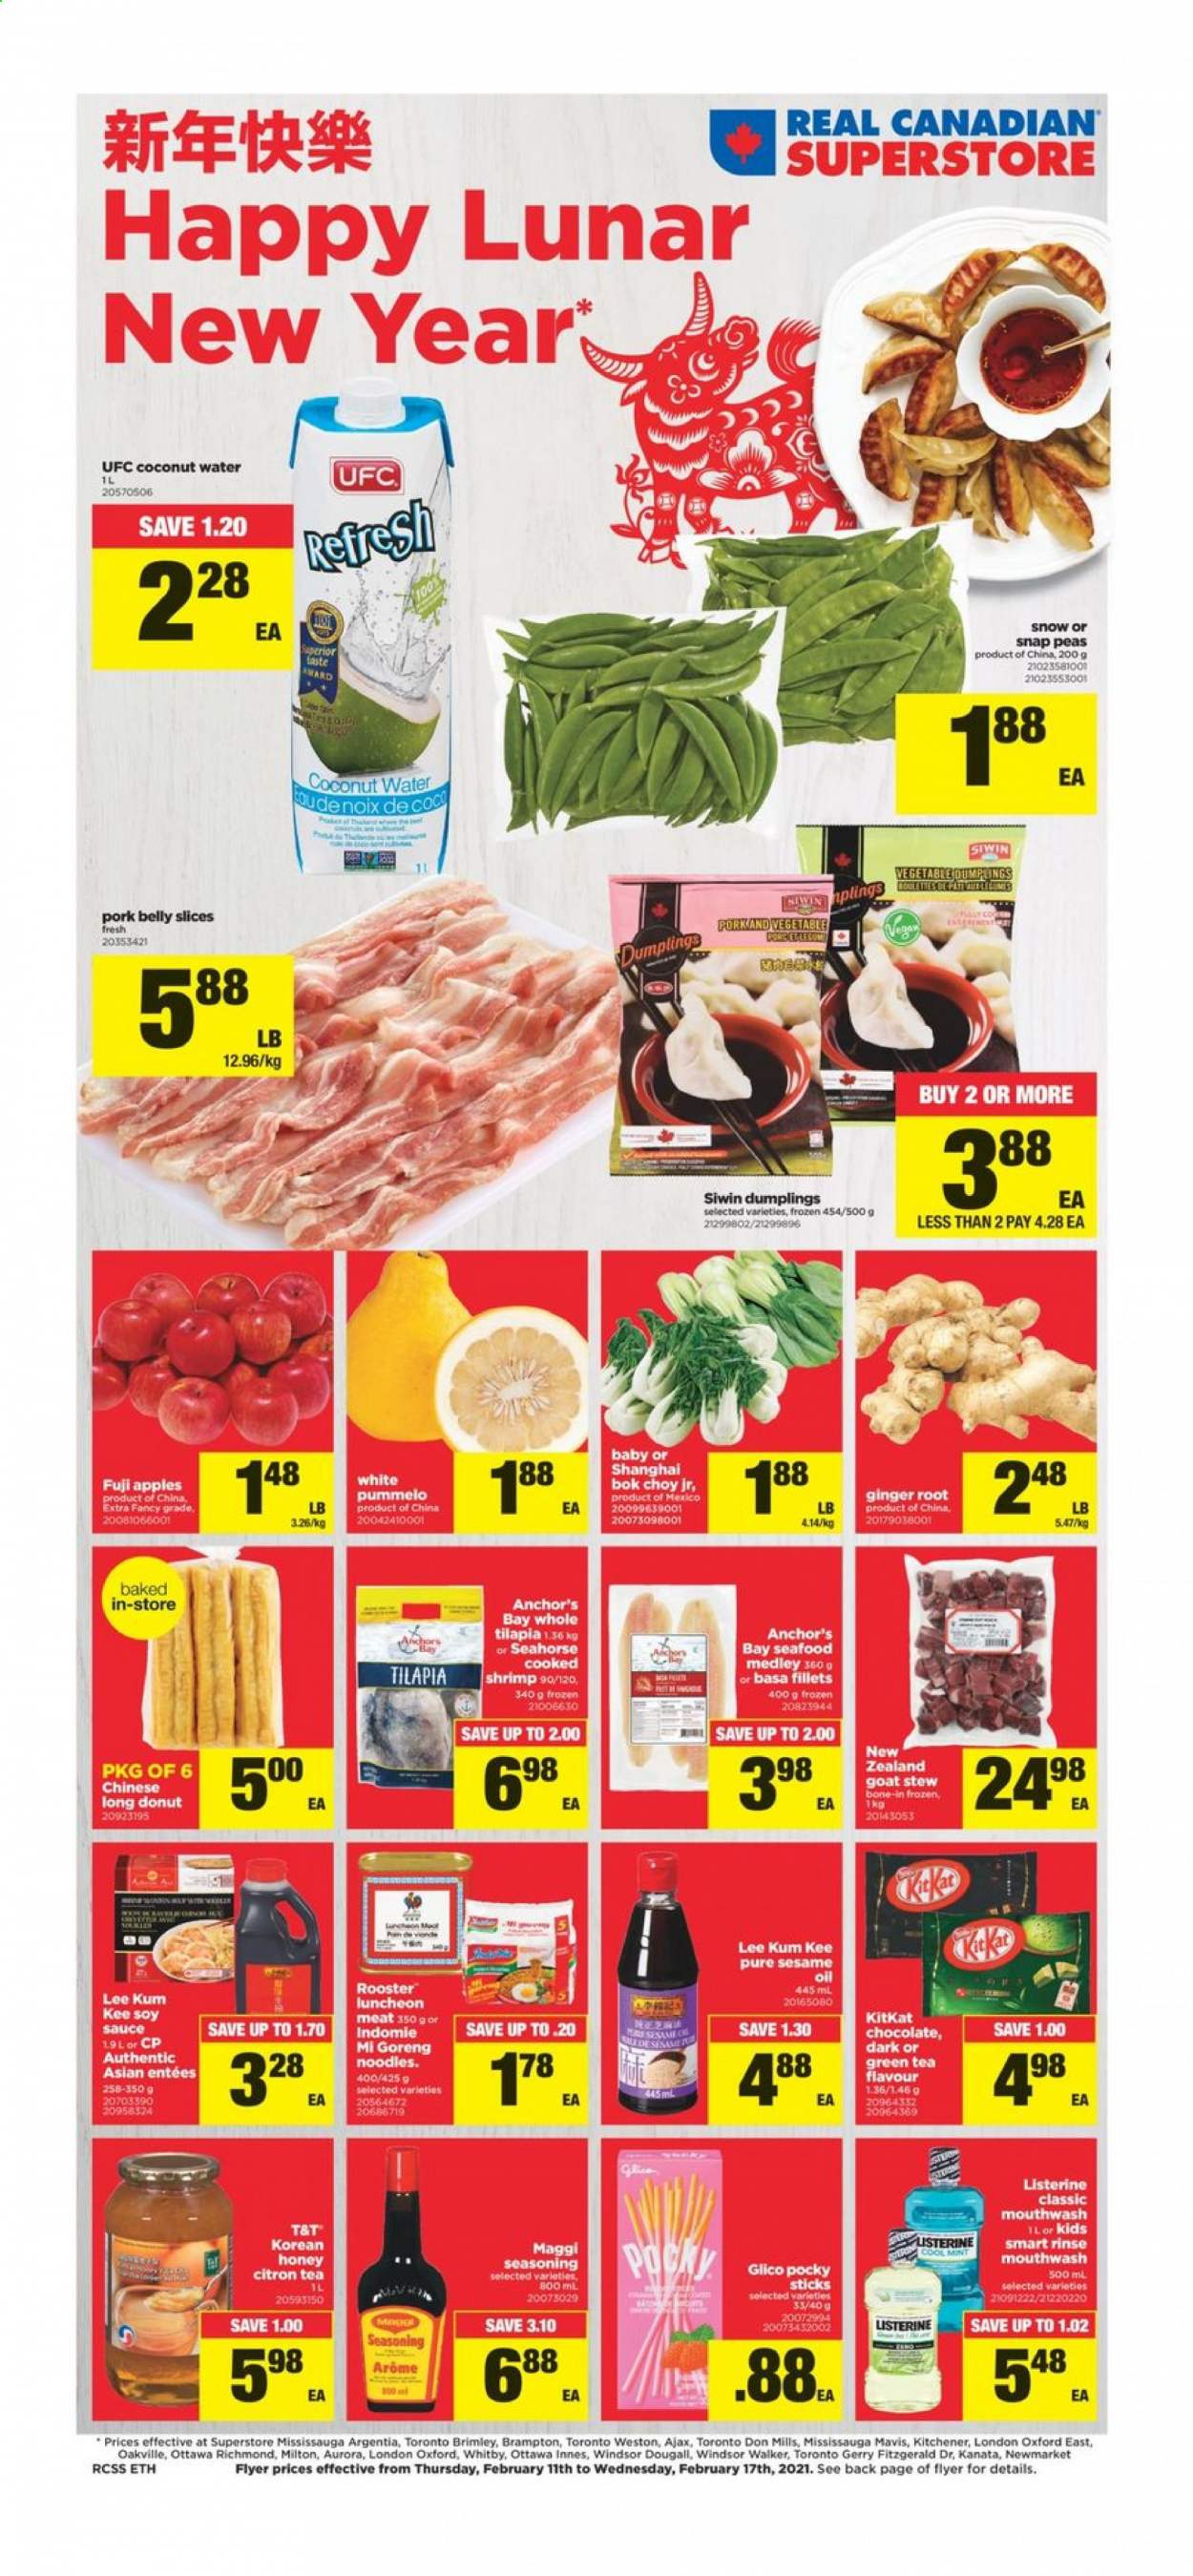 thumbnail - Real Canadian Superstore Flyer - February 11, 2021 - February 17, 2021 - Sales products - donut, bok choy, ginger, peas, apples, Fuji apple, tilapia, seafood, shrimps, sauce, dumplings, noodles, lunch meat, Anchor, snap peas, chocolate, KitKat, Maggi, spice, Lee Kum Kee, sesame oil, oil, honey, coconut water, green tea, tea, pork belly, pork meat, Ajax, mouthwash, pan, Listerine. Page 1.